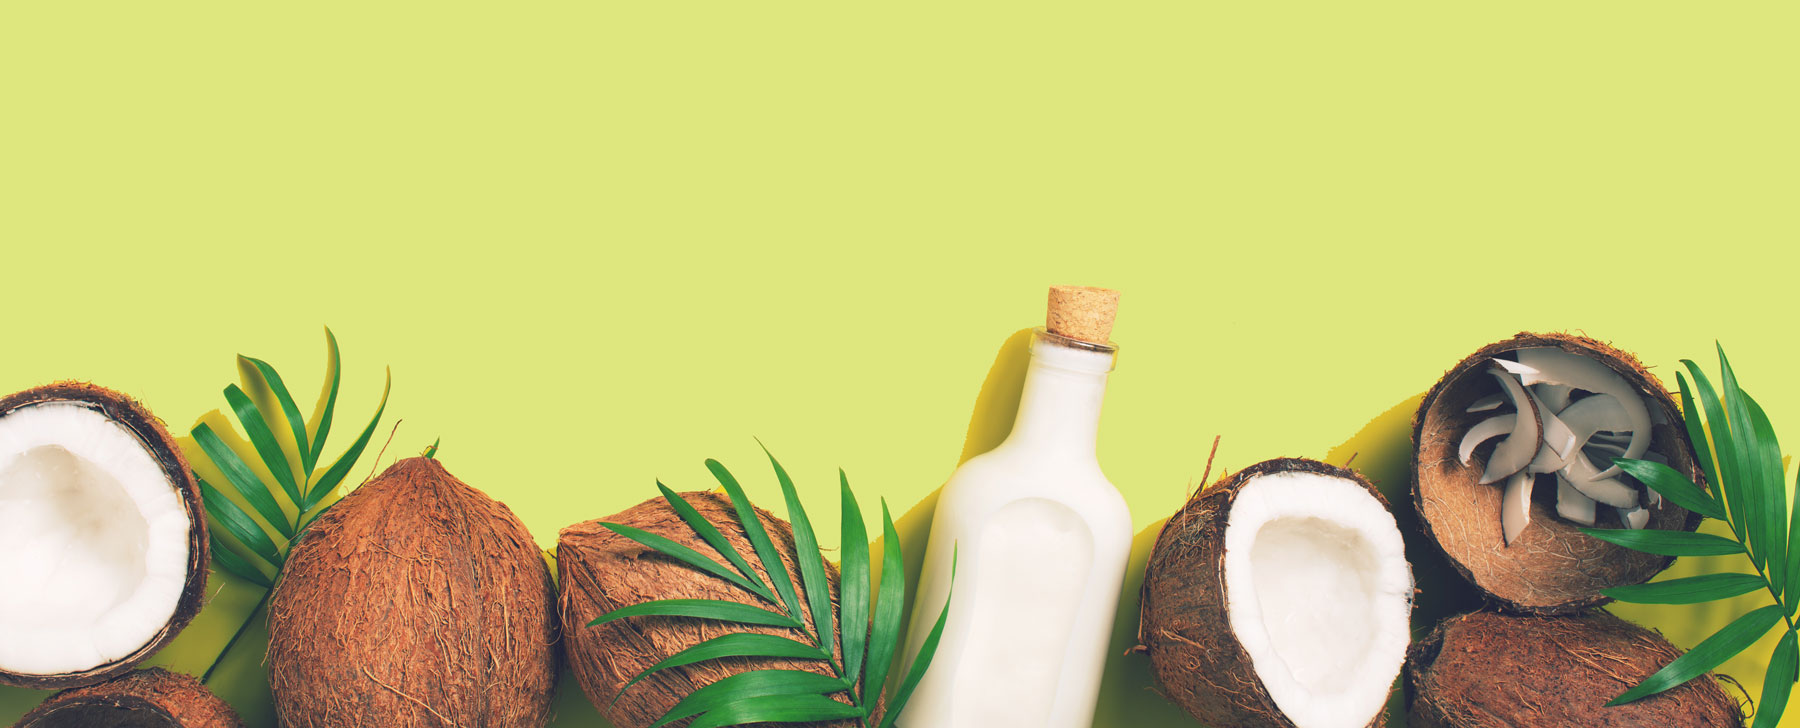 Coconuts are an awesome, natural source of fuel for those looking for a delicious plant-based treat. Here at Naturally Brand, we’re excited to bring you our Naturally Coconut, available in Original, Unsweetened Original, Vanilla, Banana and Guanabana flavors.